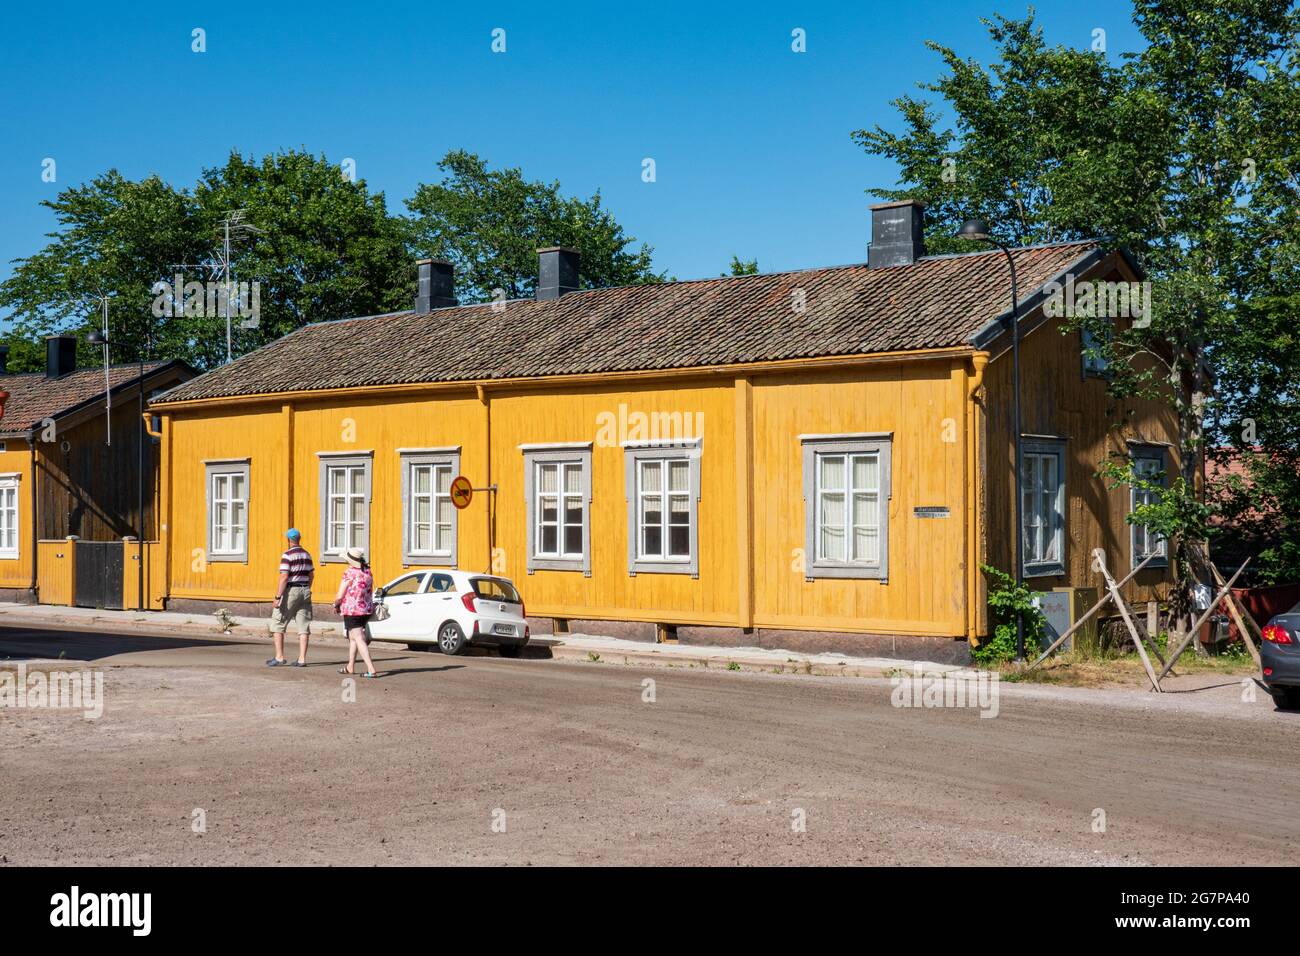 Old yellow wooden residential building or house in Loviisa, Finland Stock Photo